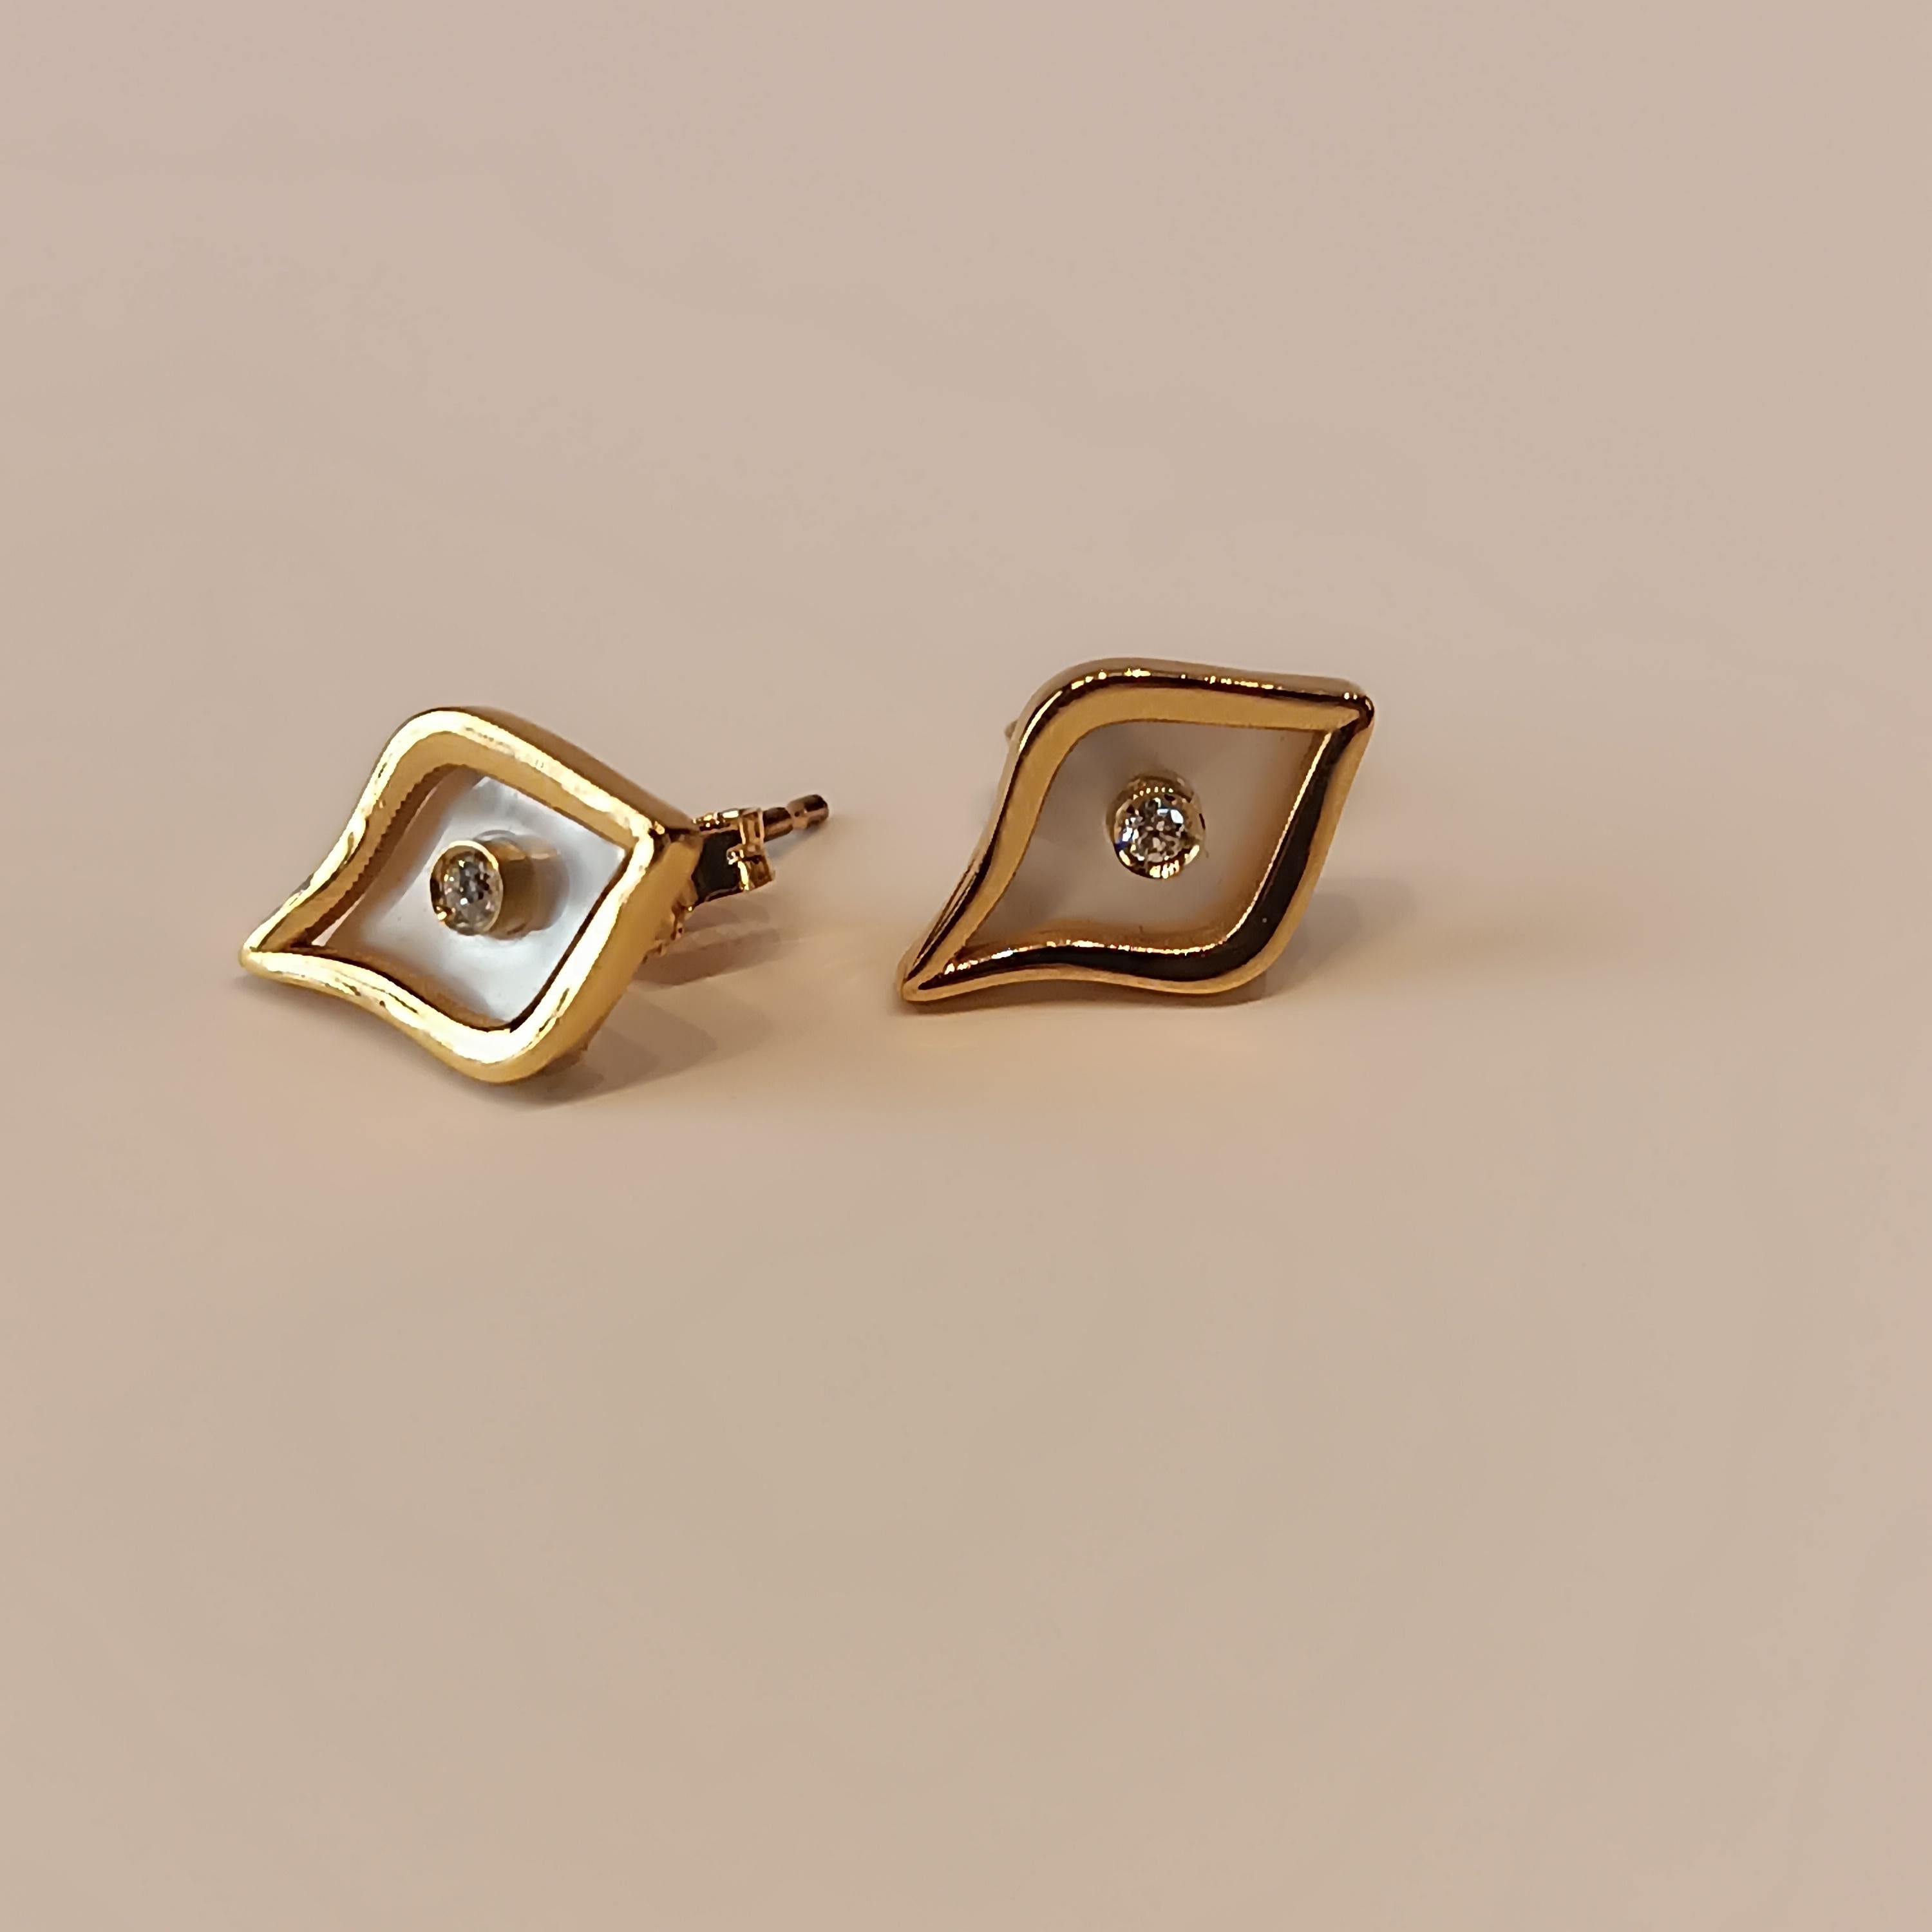 This wonderful Leo Milano earrings from our Olmetto collection shows in every detail a very complicate yet perfectly done workmanship. The earrings are in 18 rose gold with mother of pearl . The object weights 3.25 grams the  diamonds 0.6